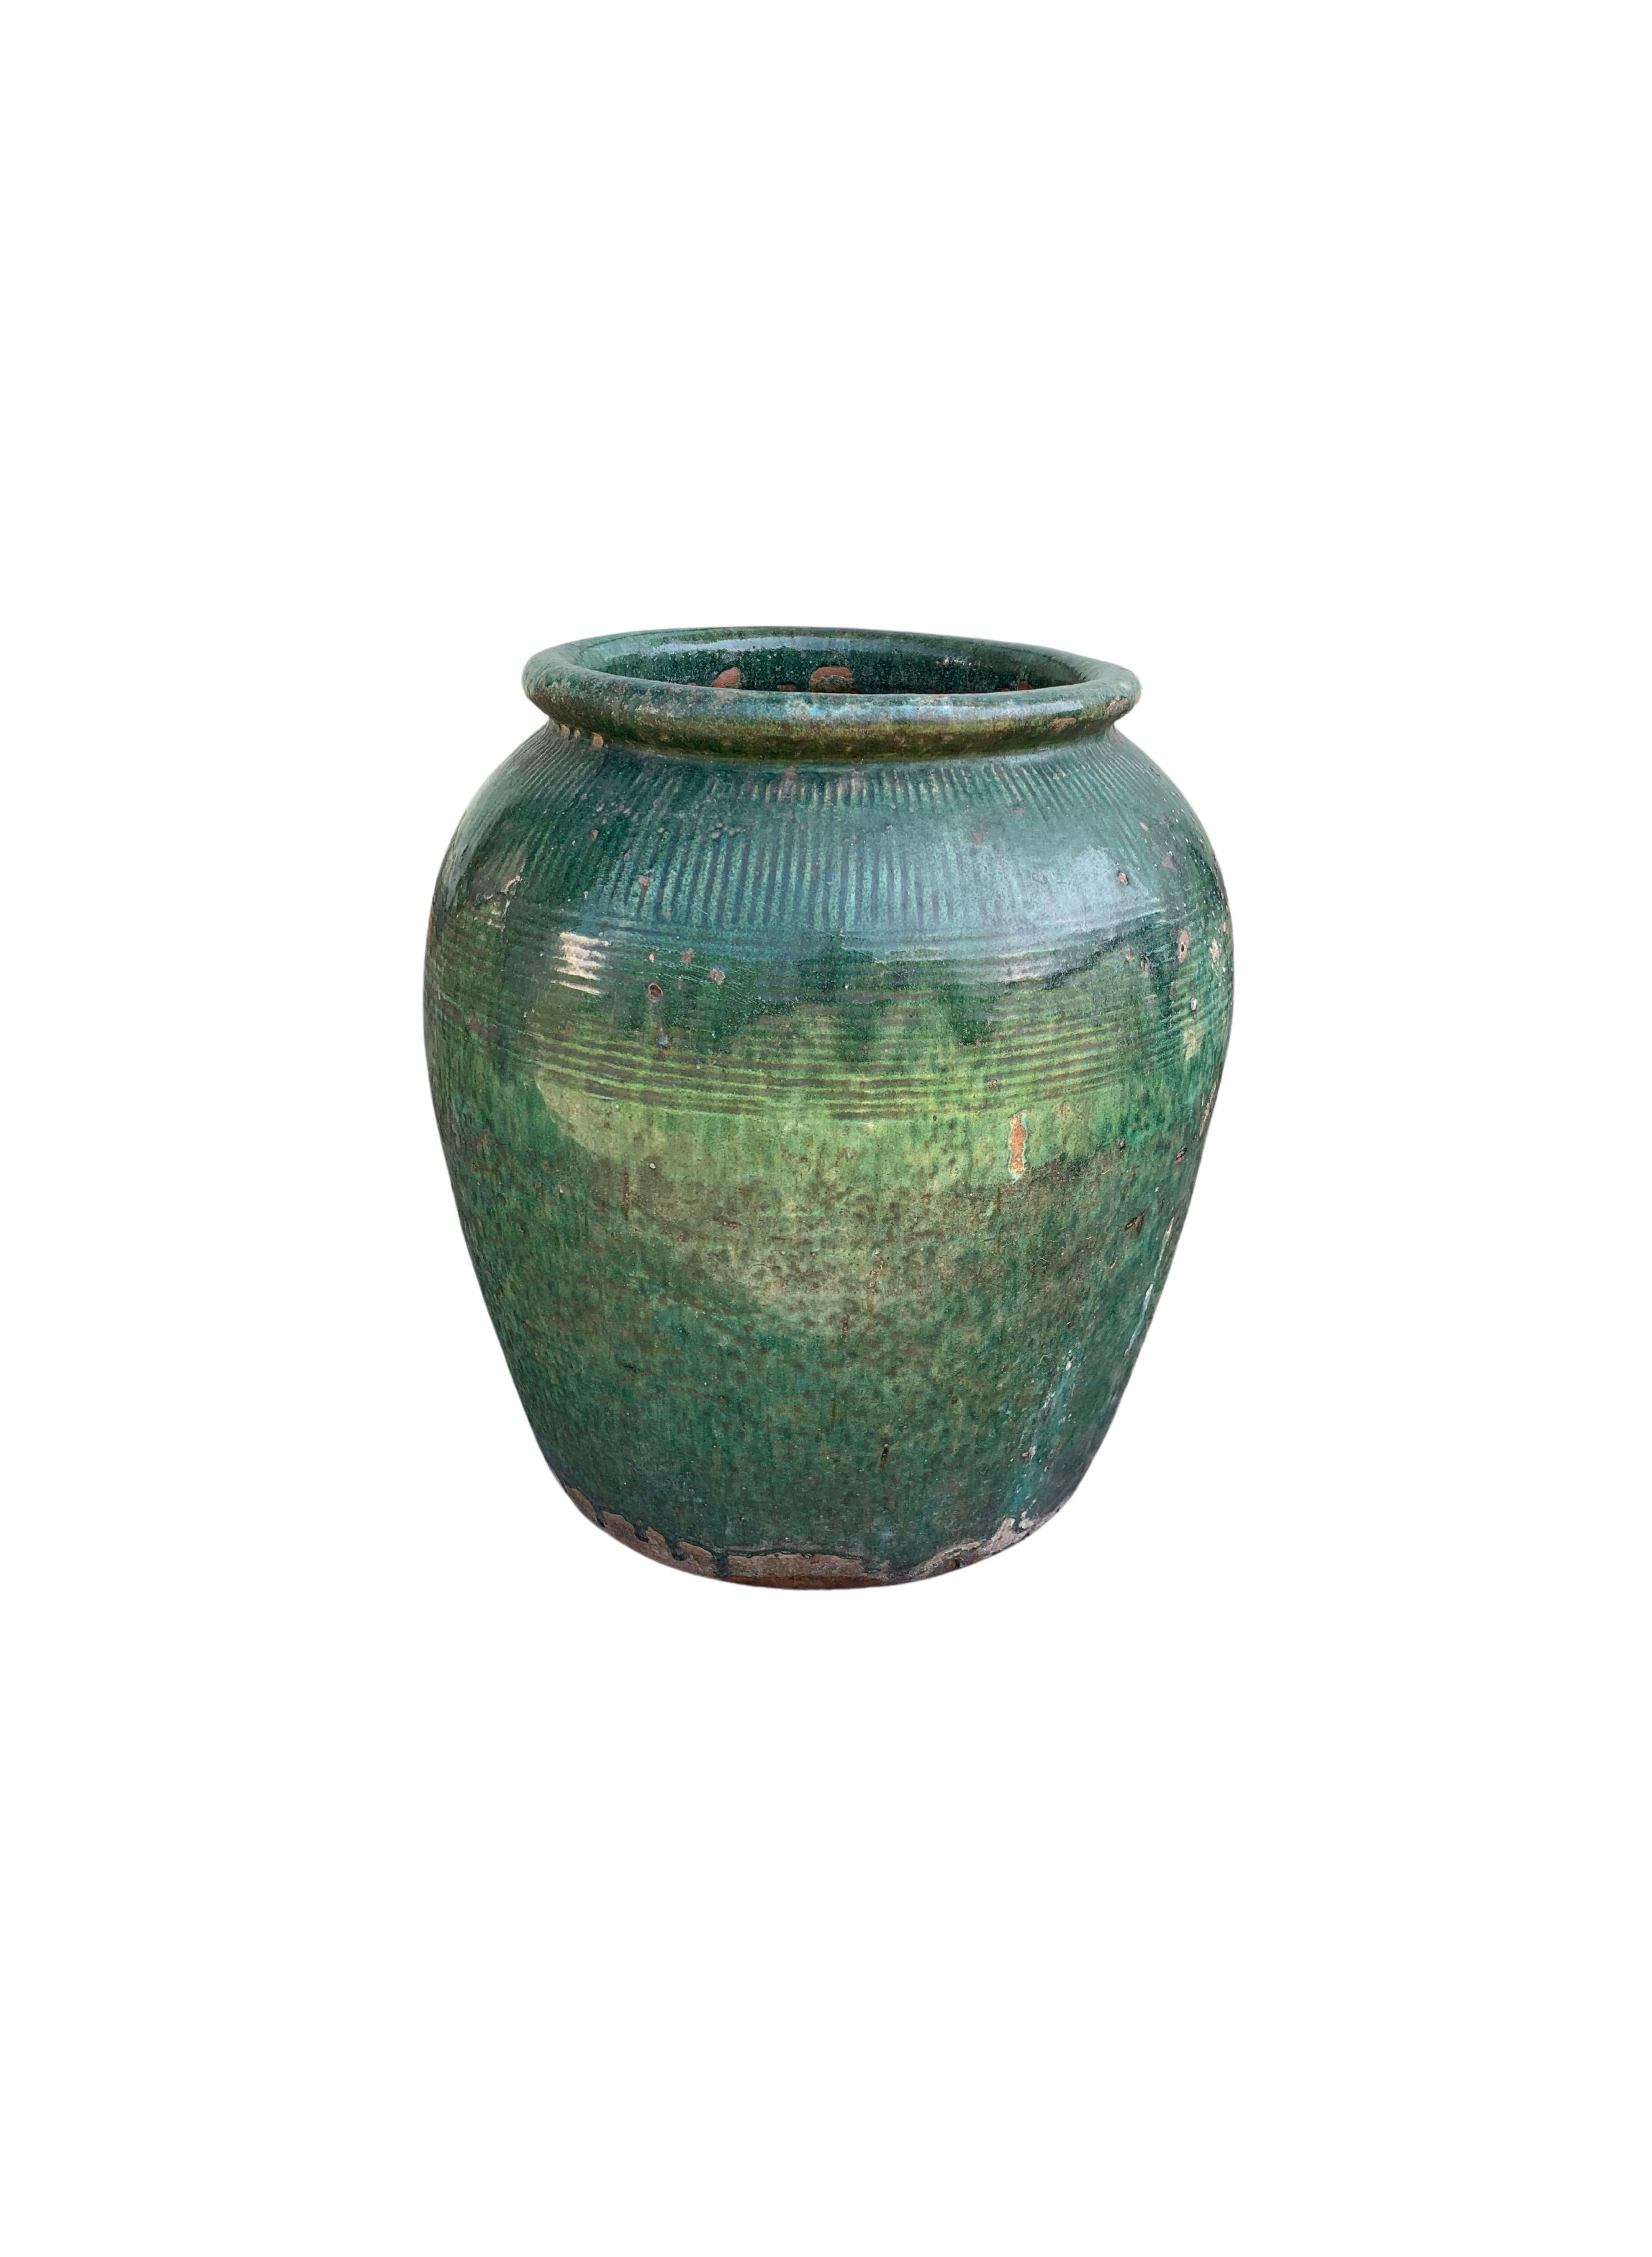 Qing Antique Chinese Green Glazed Ceramic Soy Sauce Jar, c. 1900 For Sale